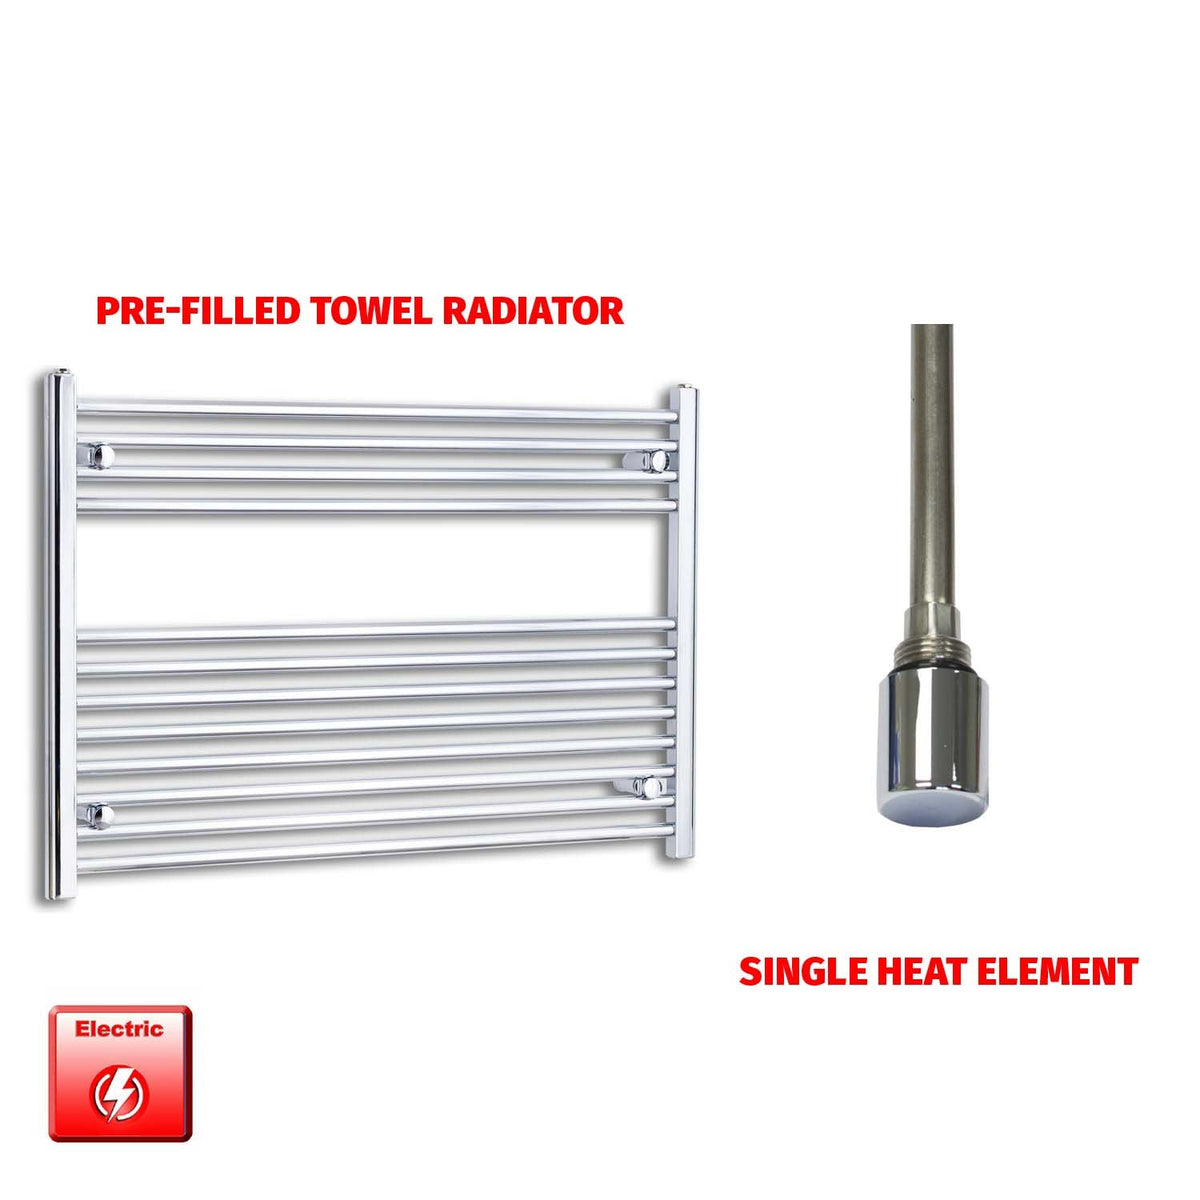 700 x 1200 Pre-Filled Electric Heated Towel Radiator Straight Chrome Single heat element no timer